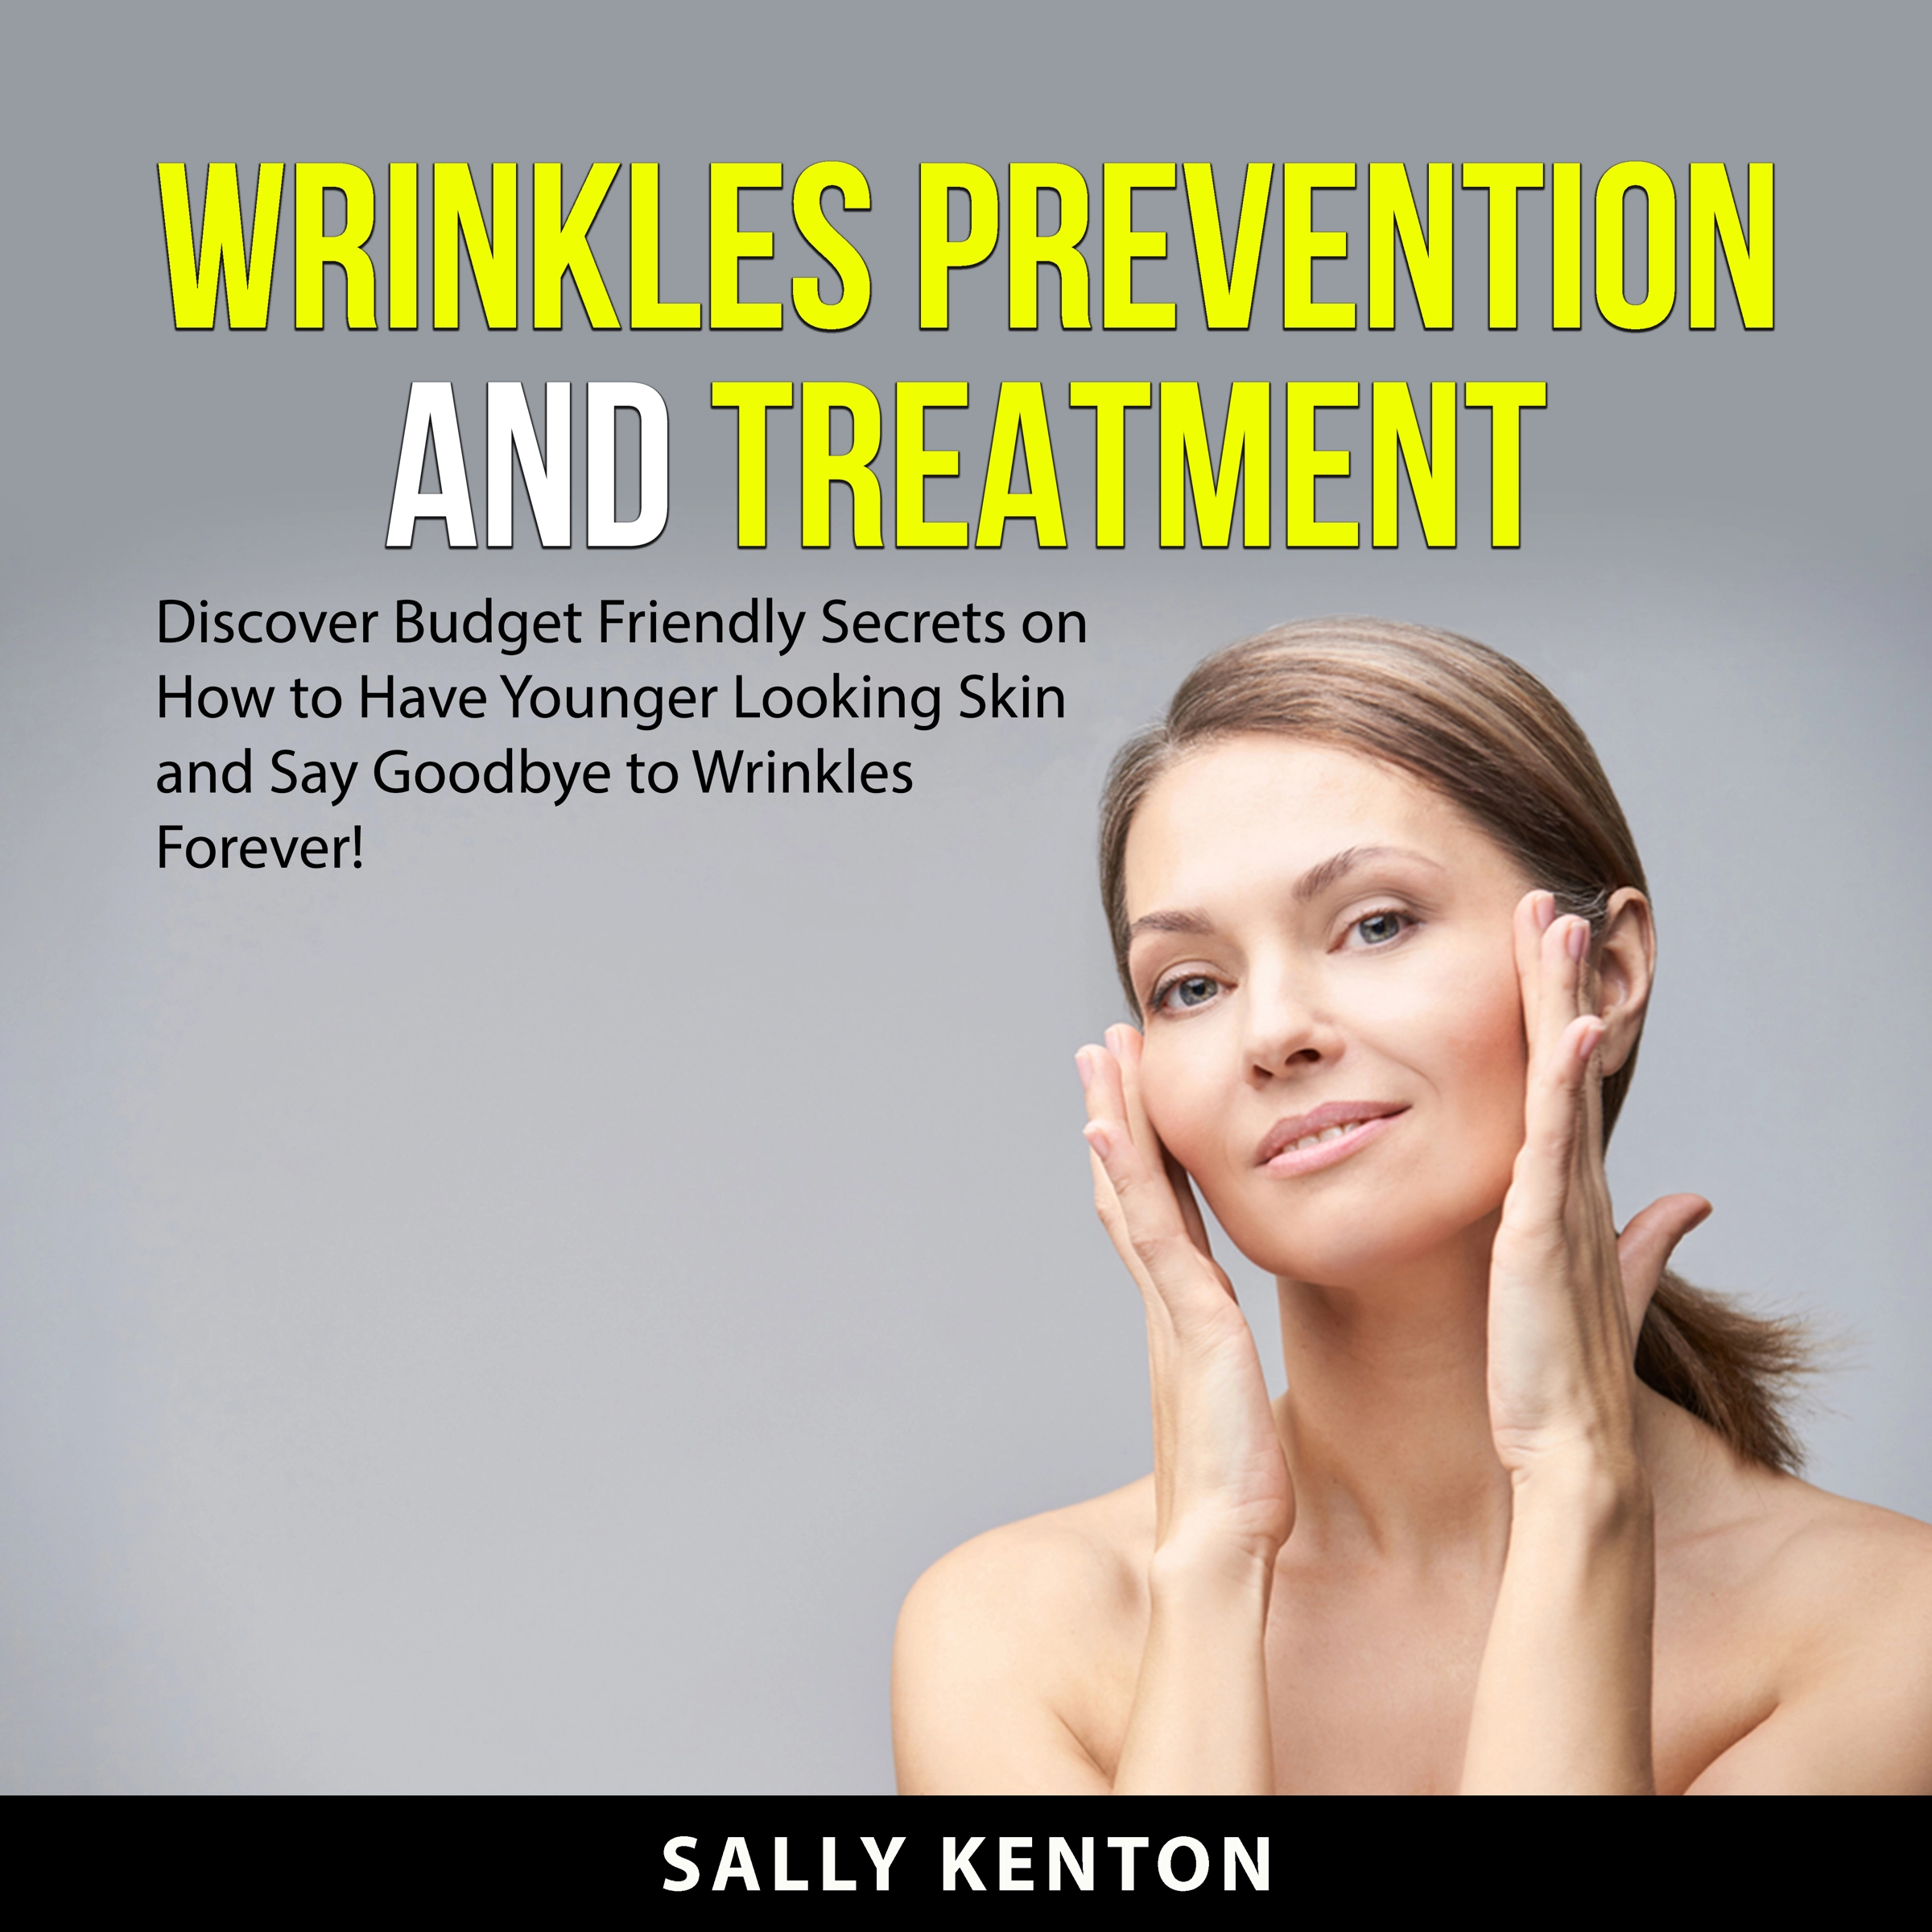 Wrinkles Prevention and Treatment Audiobook by Sally Kenton